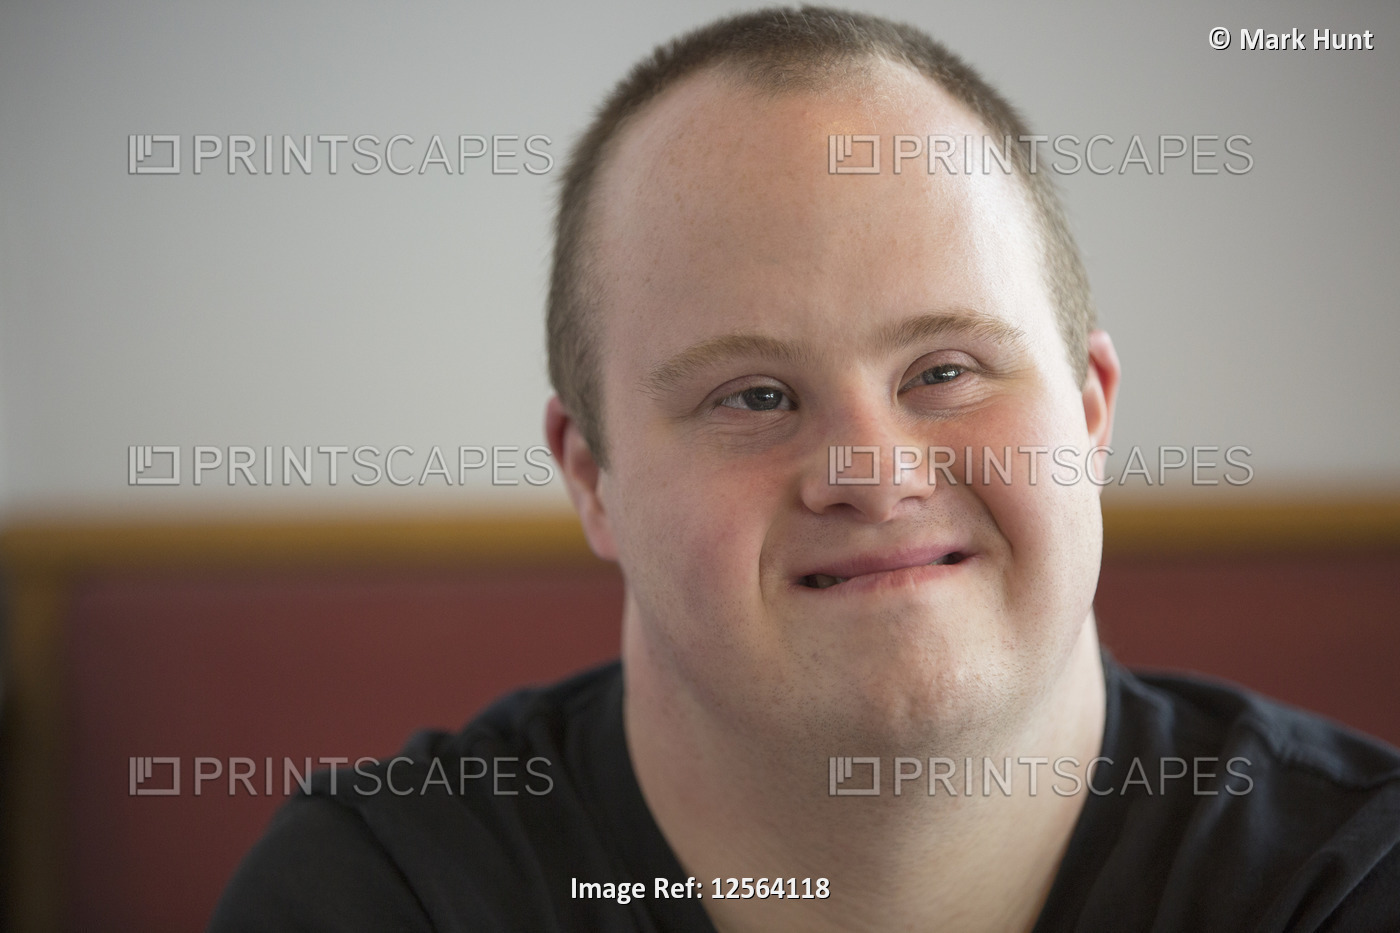 Portrait of waiter with Down Syndrome in a restaurant